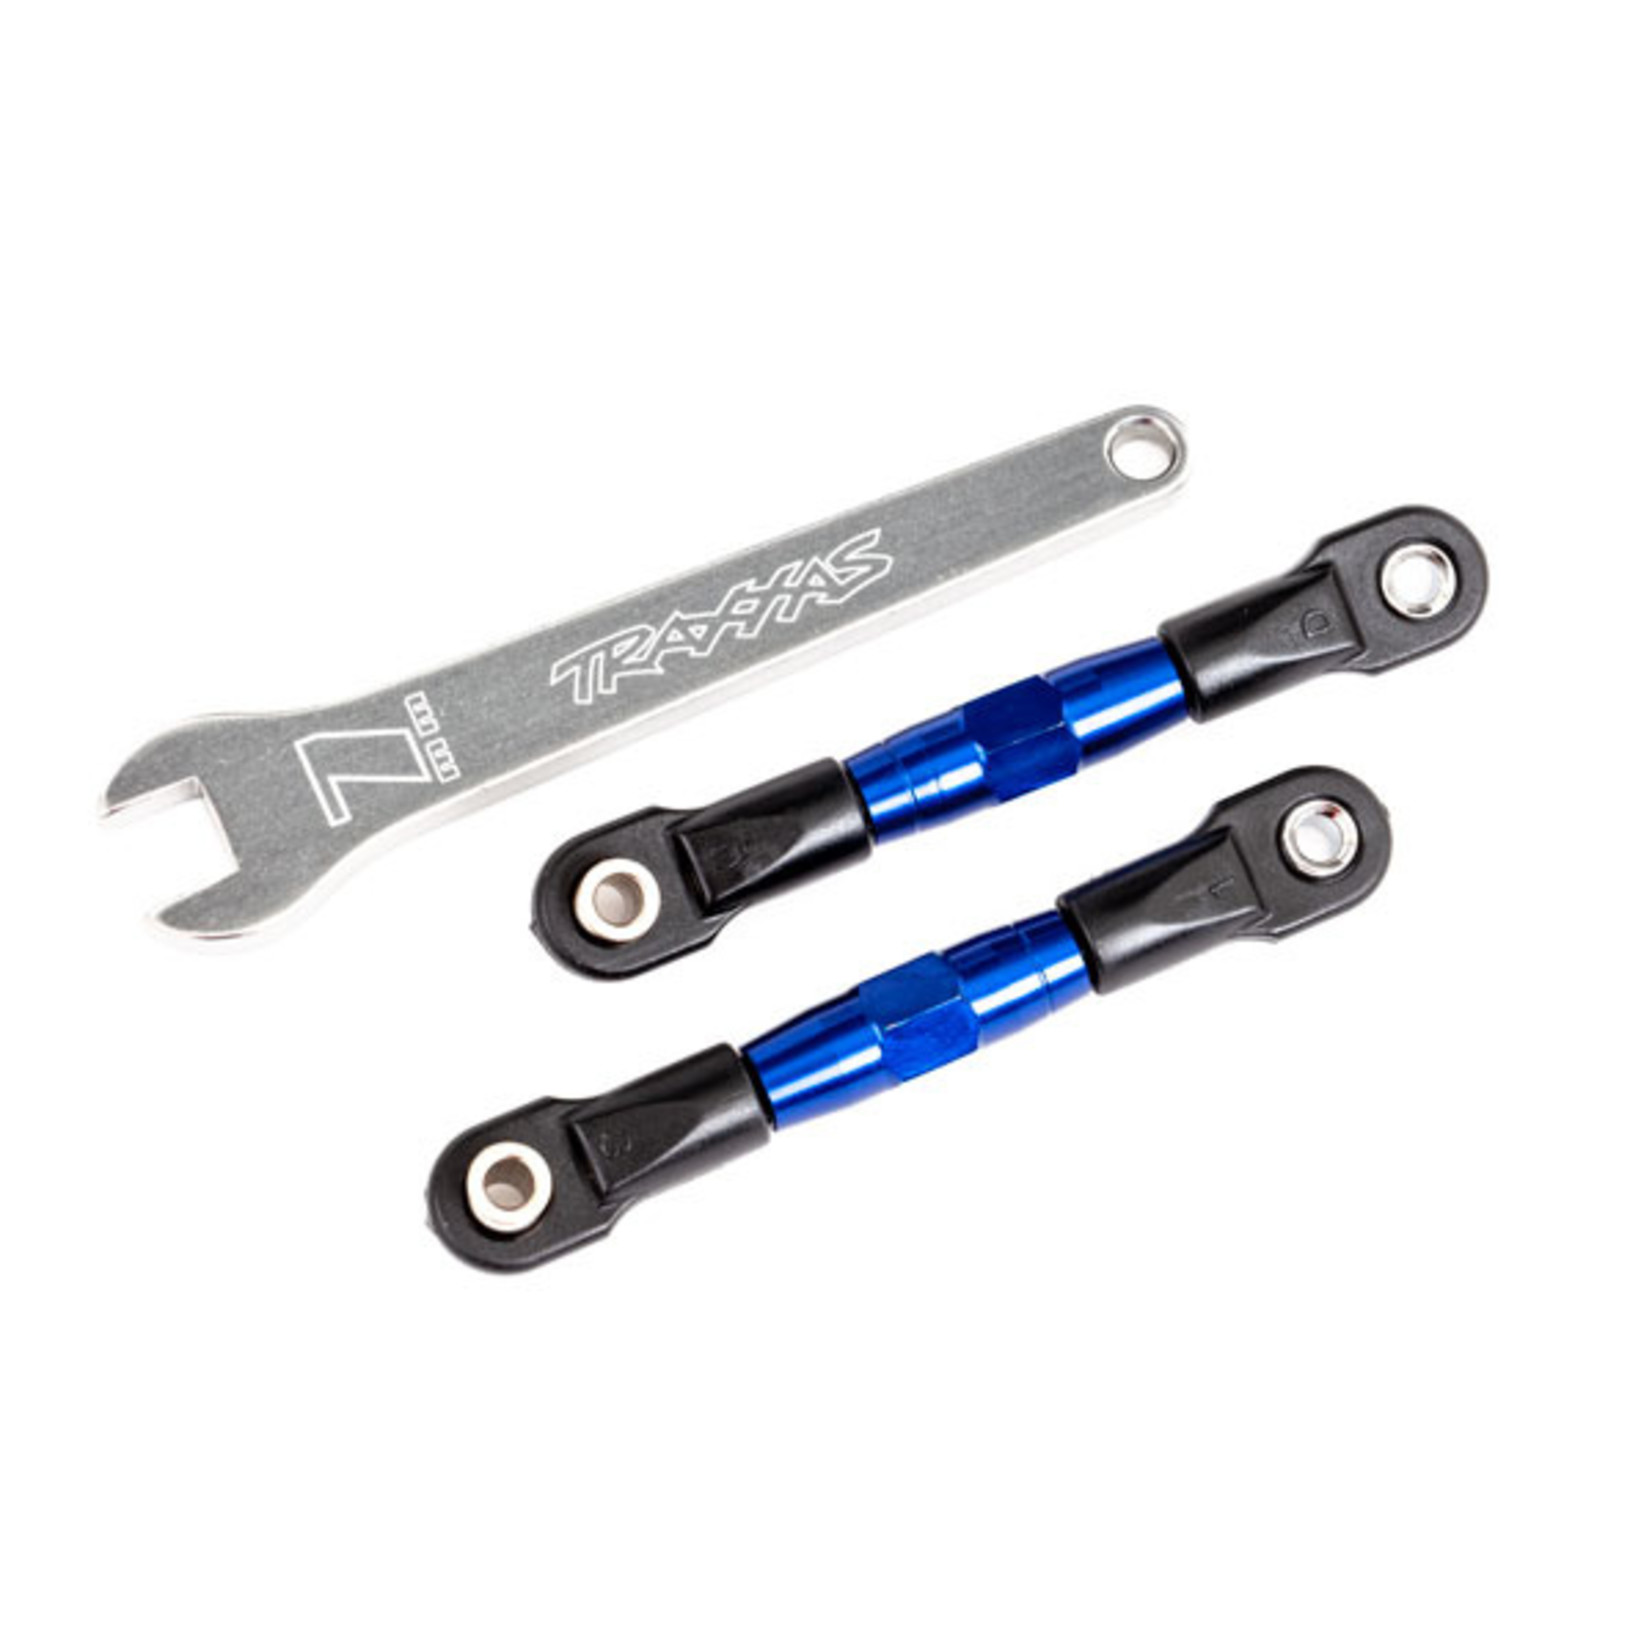 Traxxas 2443X - Camber links, rear (TUBES blue-anodized, 7075-T